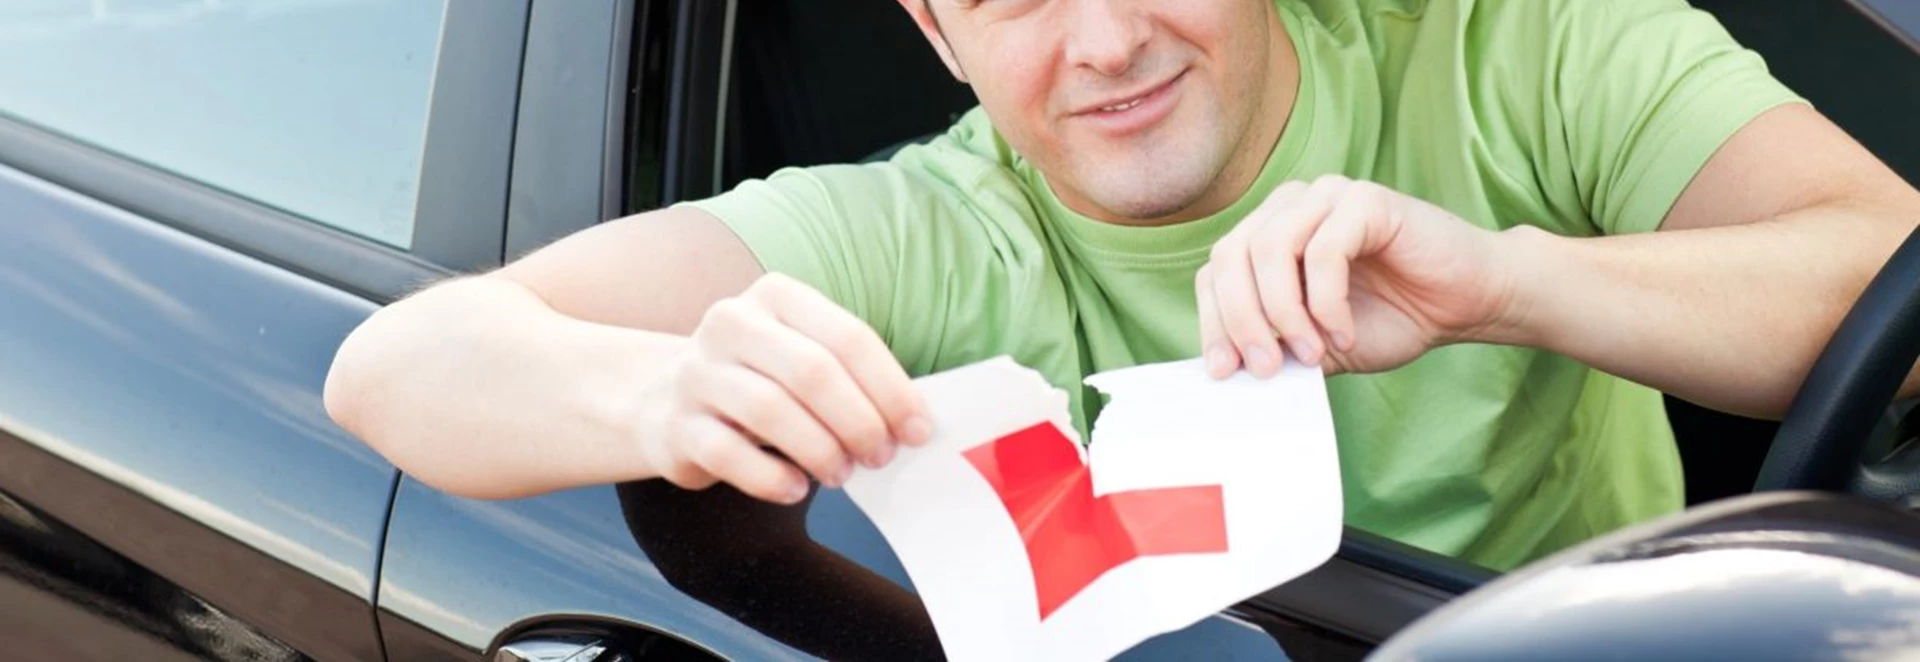 New UK driving test questions revealed 